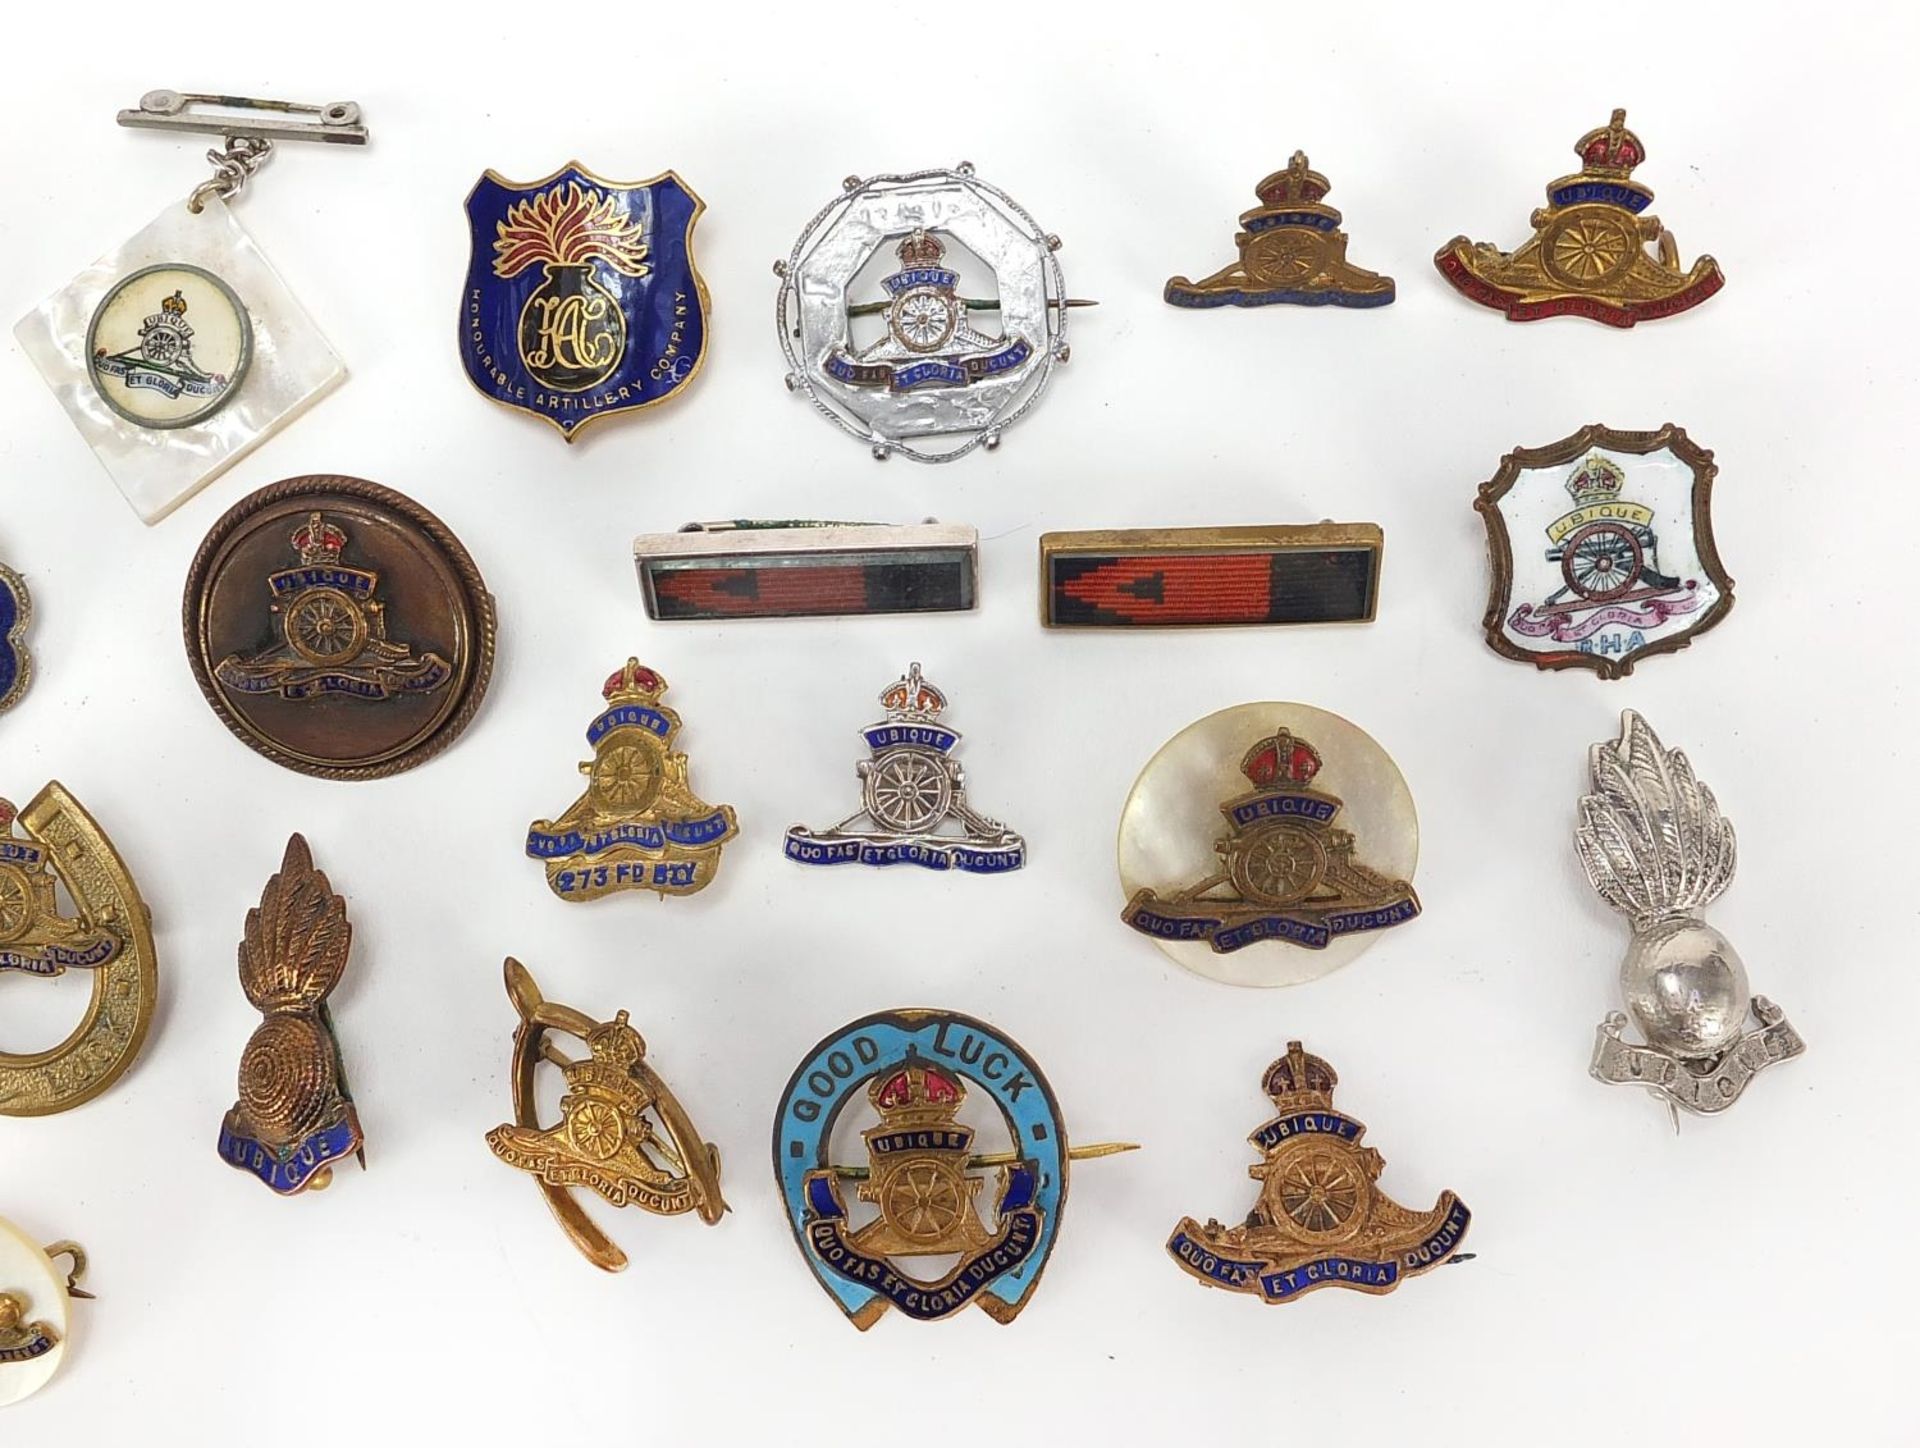 Twenty six British military Royal Artillery badges and bars, including enamel and silver examples - Image 6 of 9